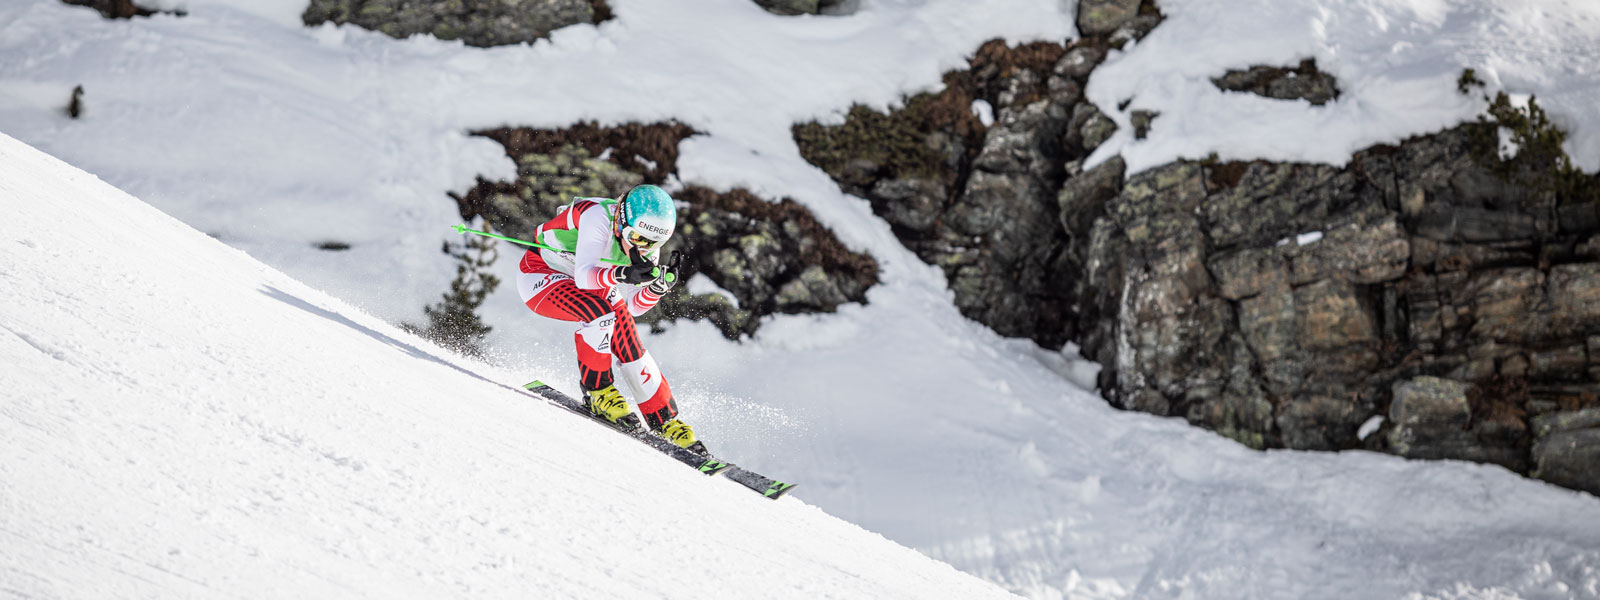 Ski runner in a red and white racing suit in a downhill position with a slight swing with large snow-covered rocks in the background